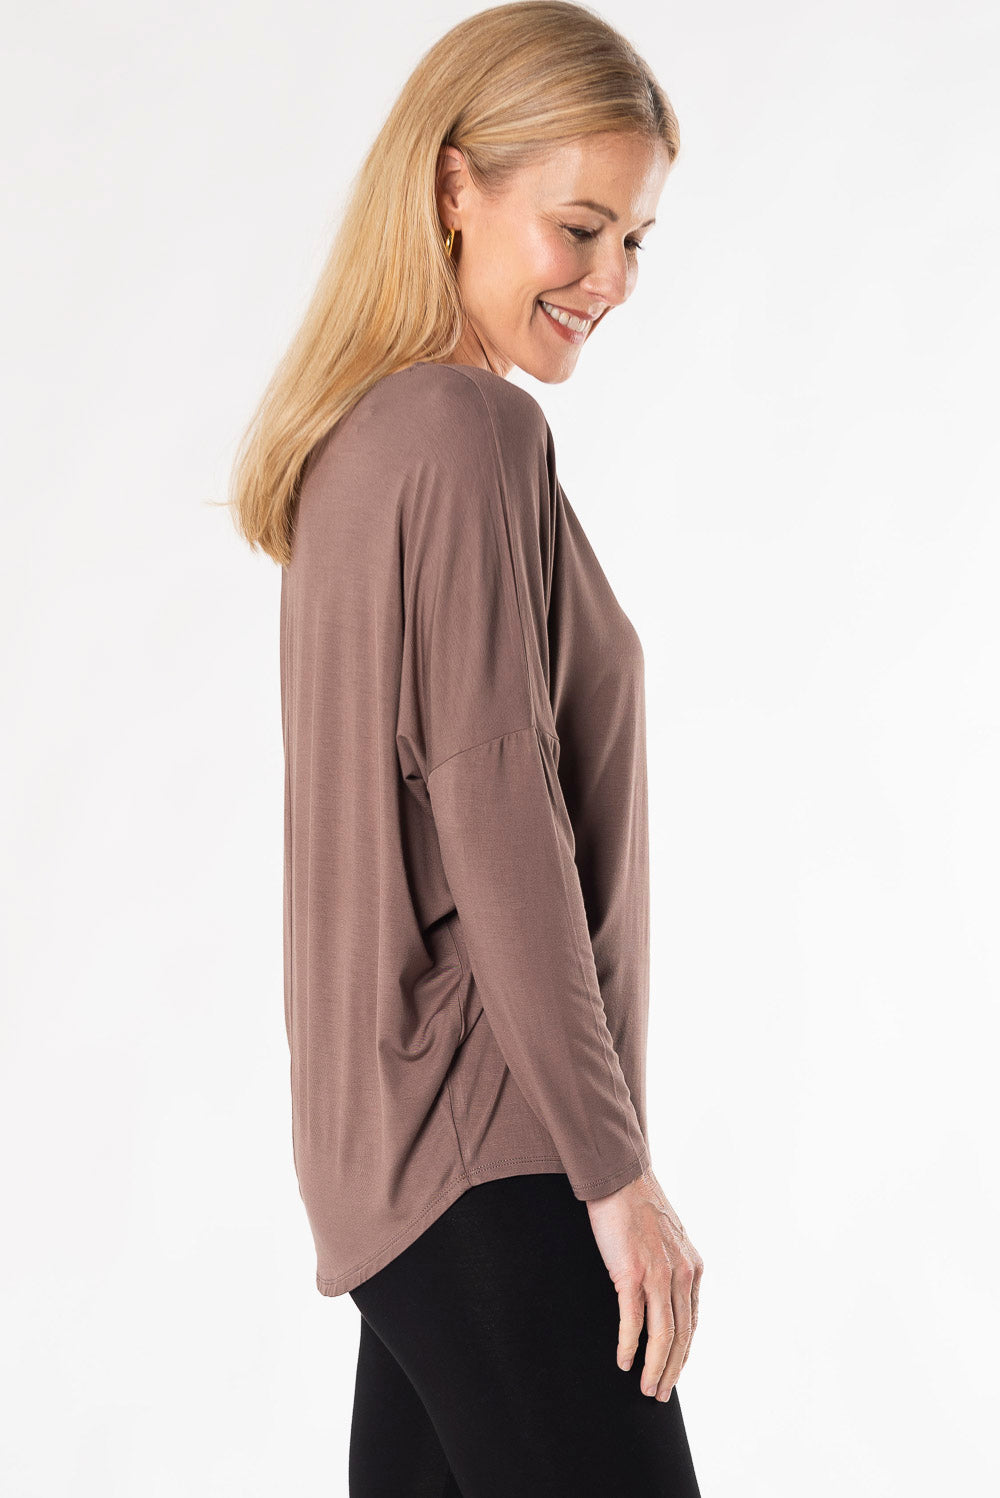 Bamboo batwing long sleeve boat neck top - brown